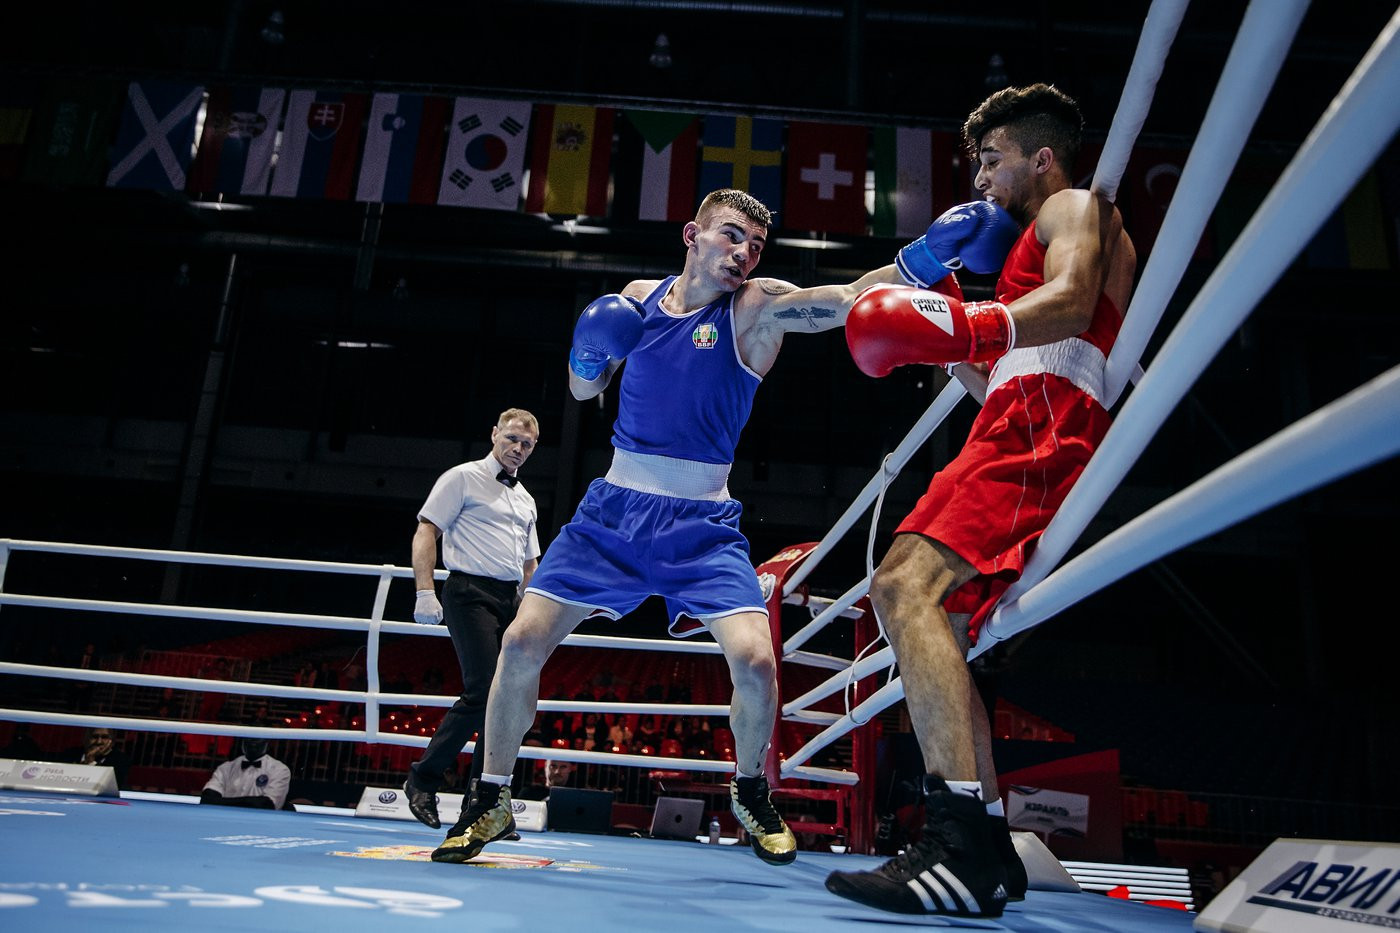 After the first round of the flyweight, competition moved on to the light welterweight ©Yekaterinburg 2019